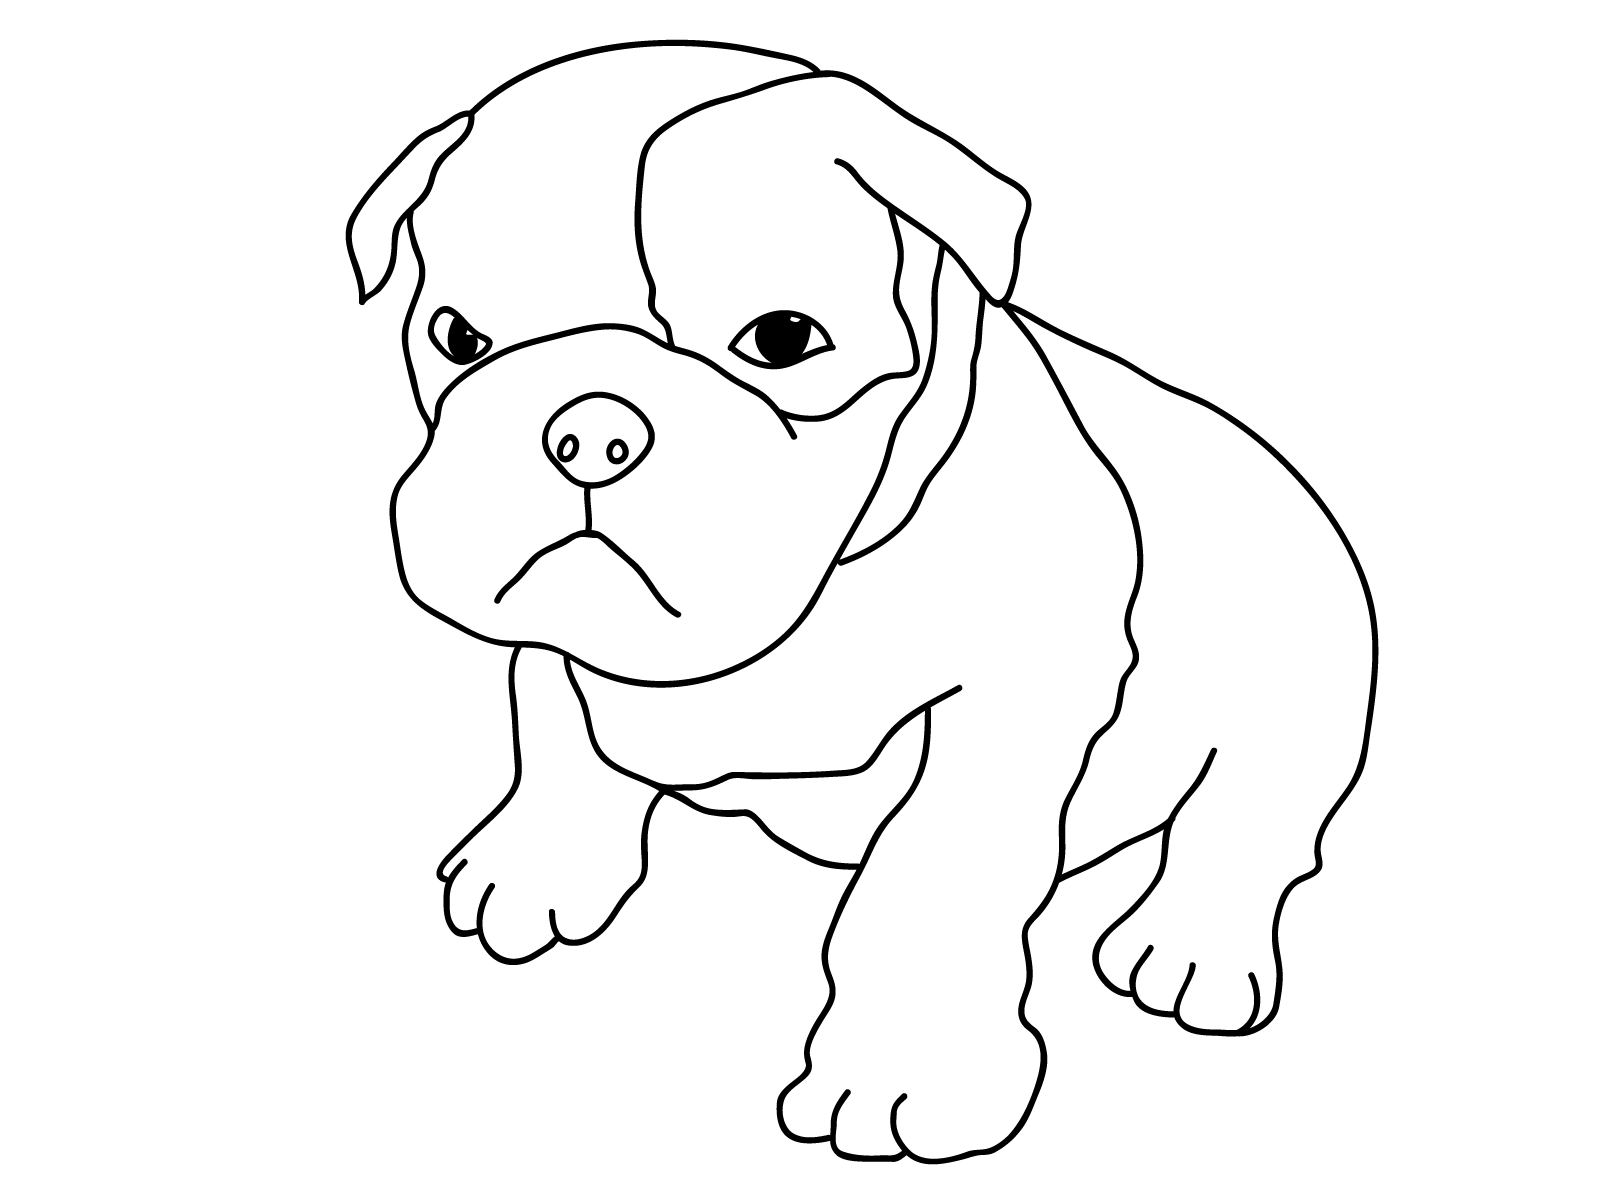 Dog Coloring Pages - Printable Free Coloring Pages